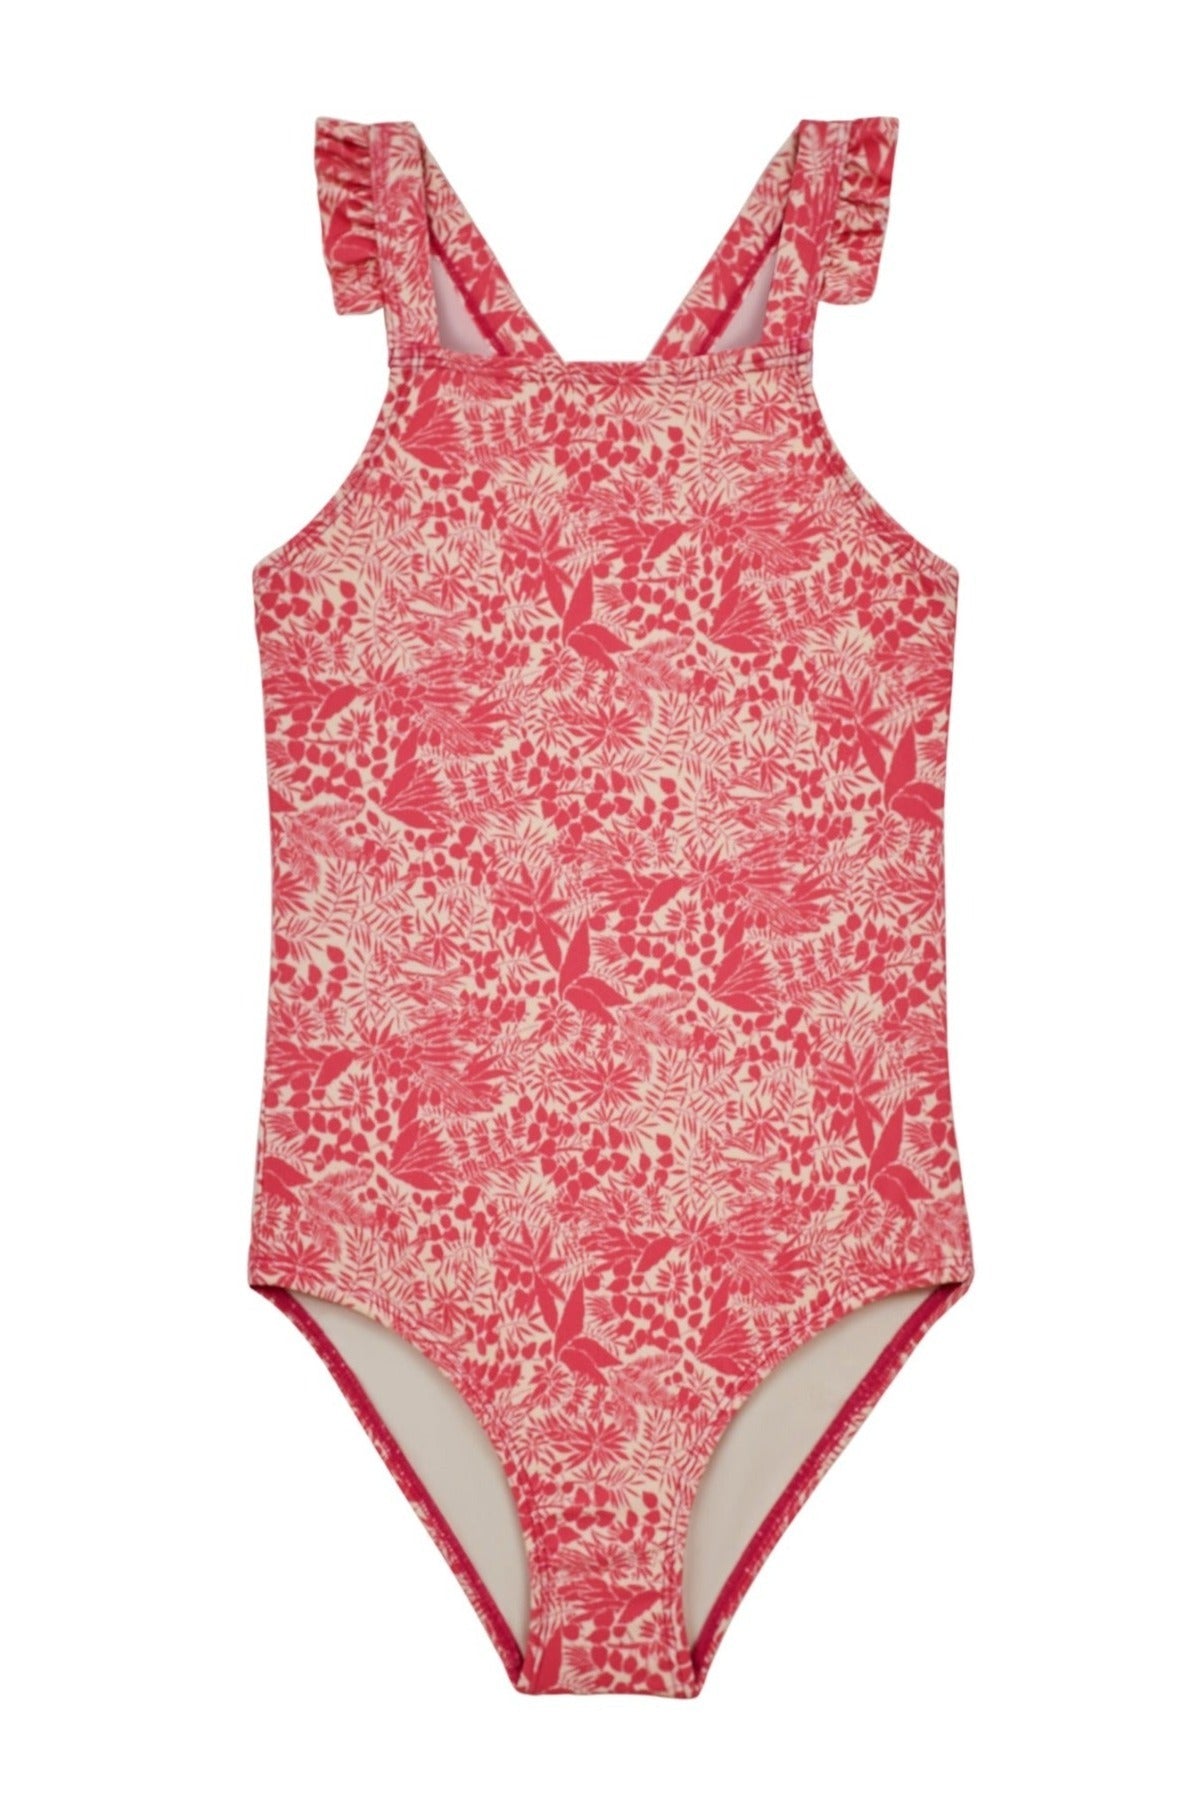 Little Cece One-Piece Swimsuit by Hermoza